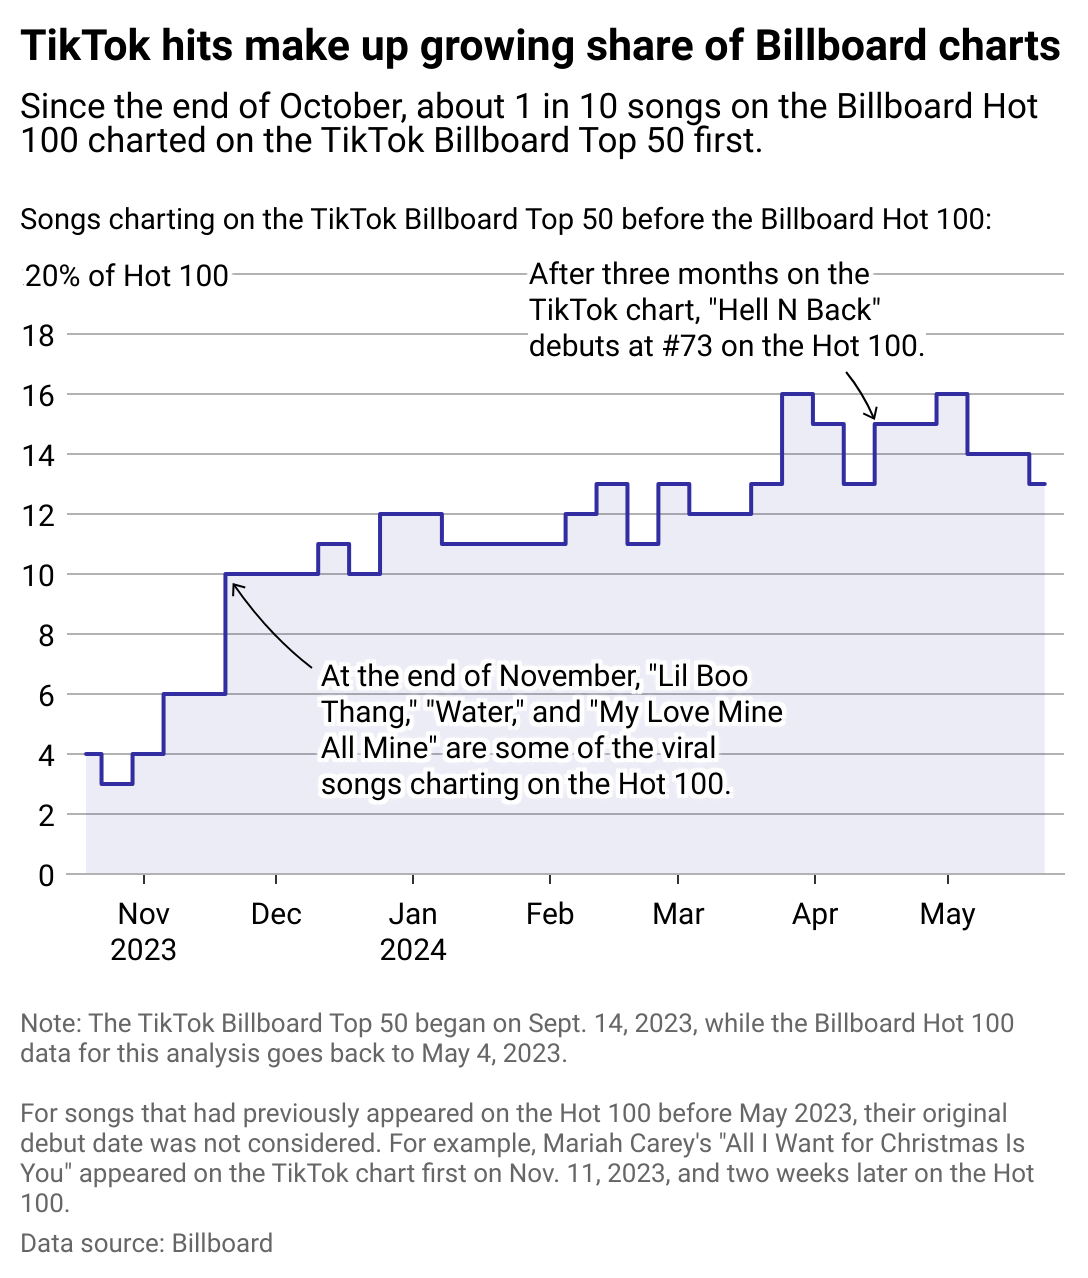 Chart showing TikTok hits make up steady share of Billboard's charts, averaging around 18% from September 14, 2023, through May 16, 2024. The first TikTok Top 50 chart placed "Paint the Town Red" by Doja Cat at #2 as it was simultaneously charting #1 on the Billboard Hot 100.